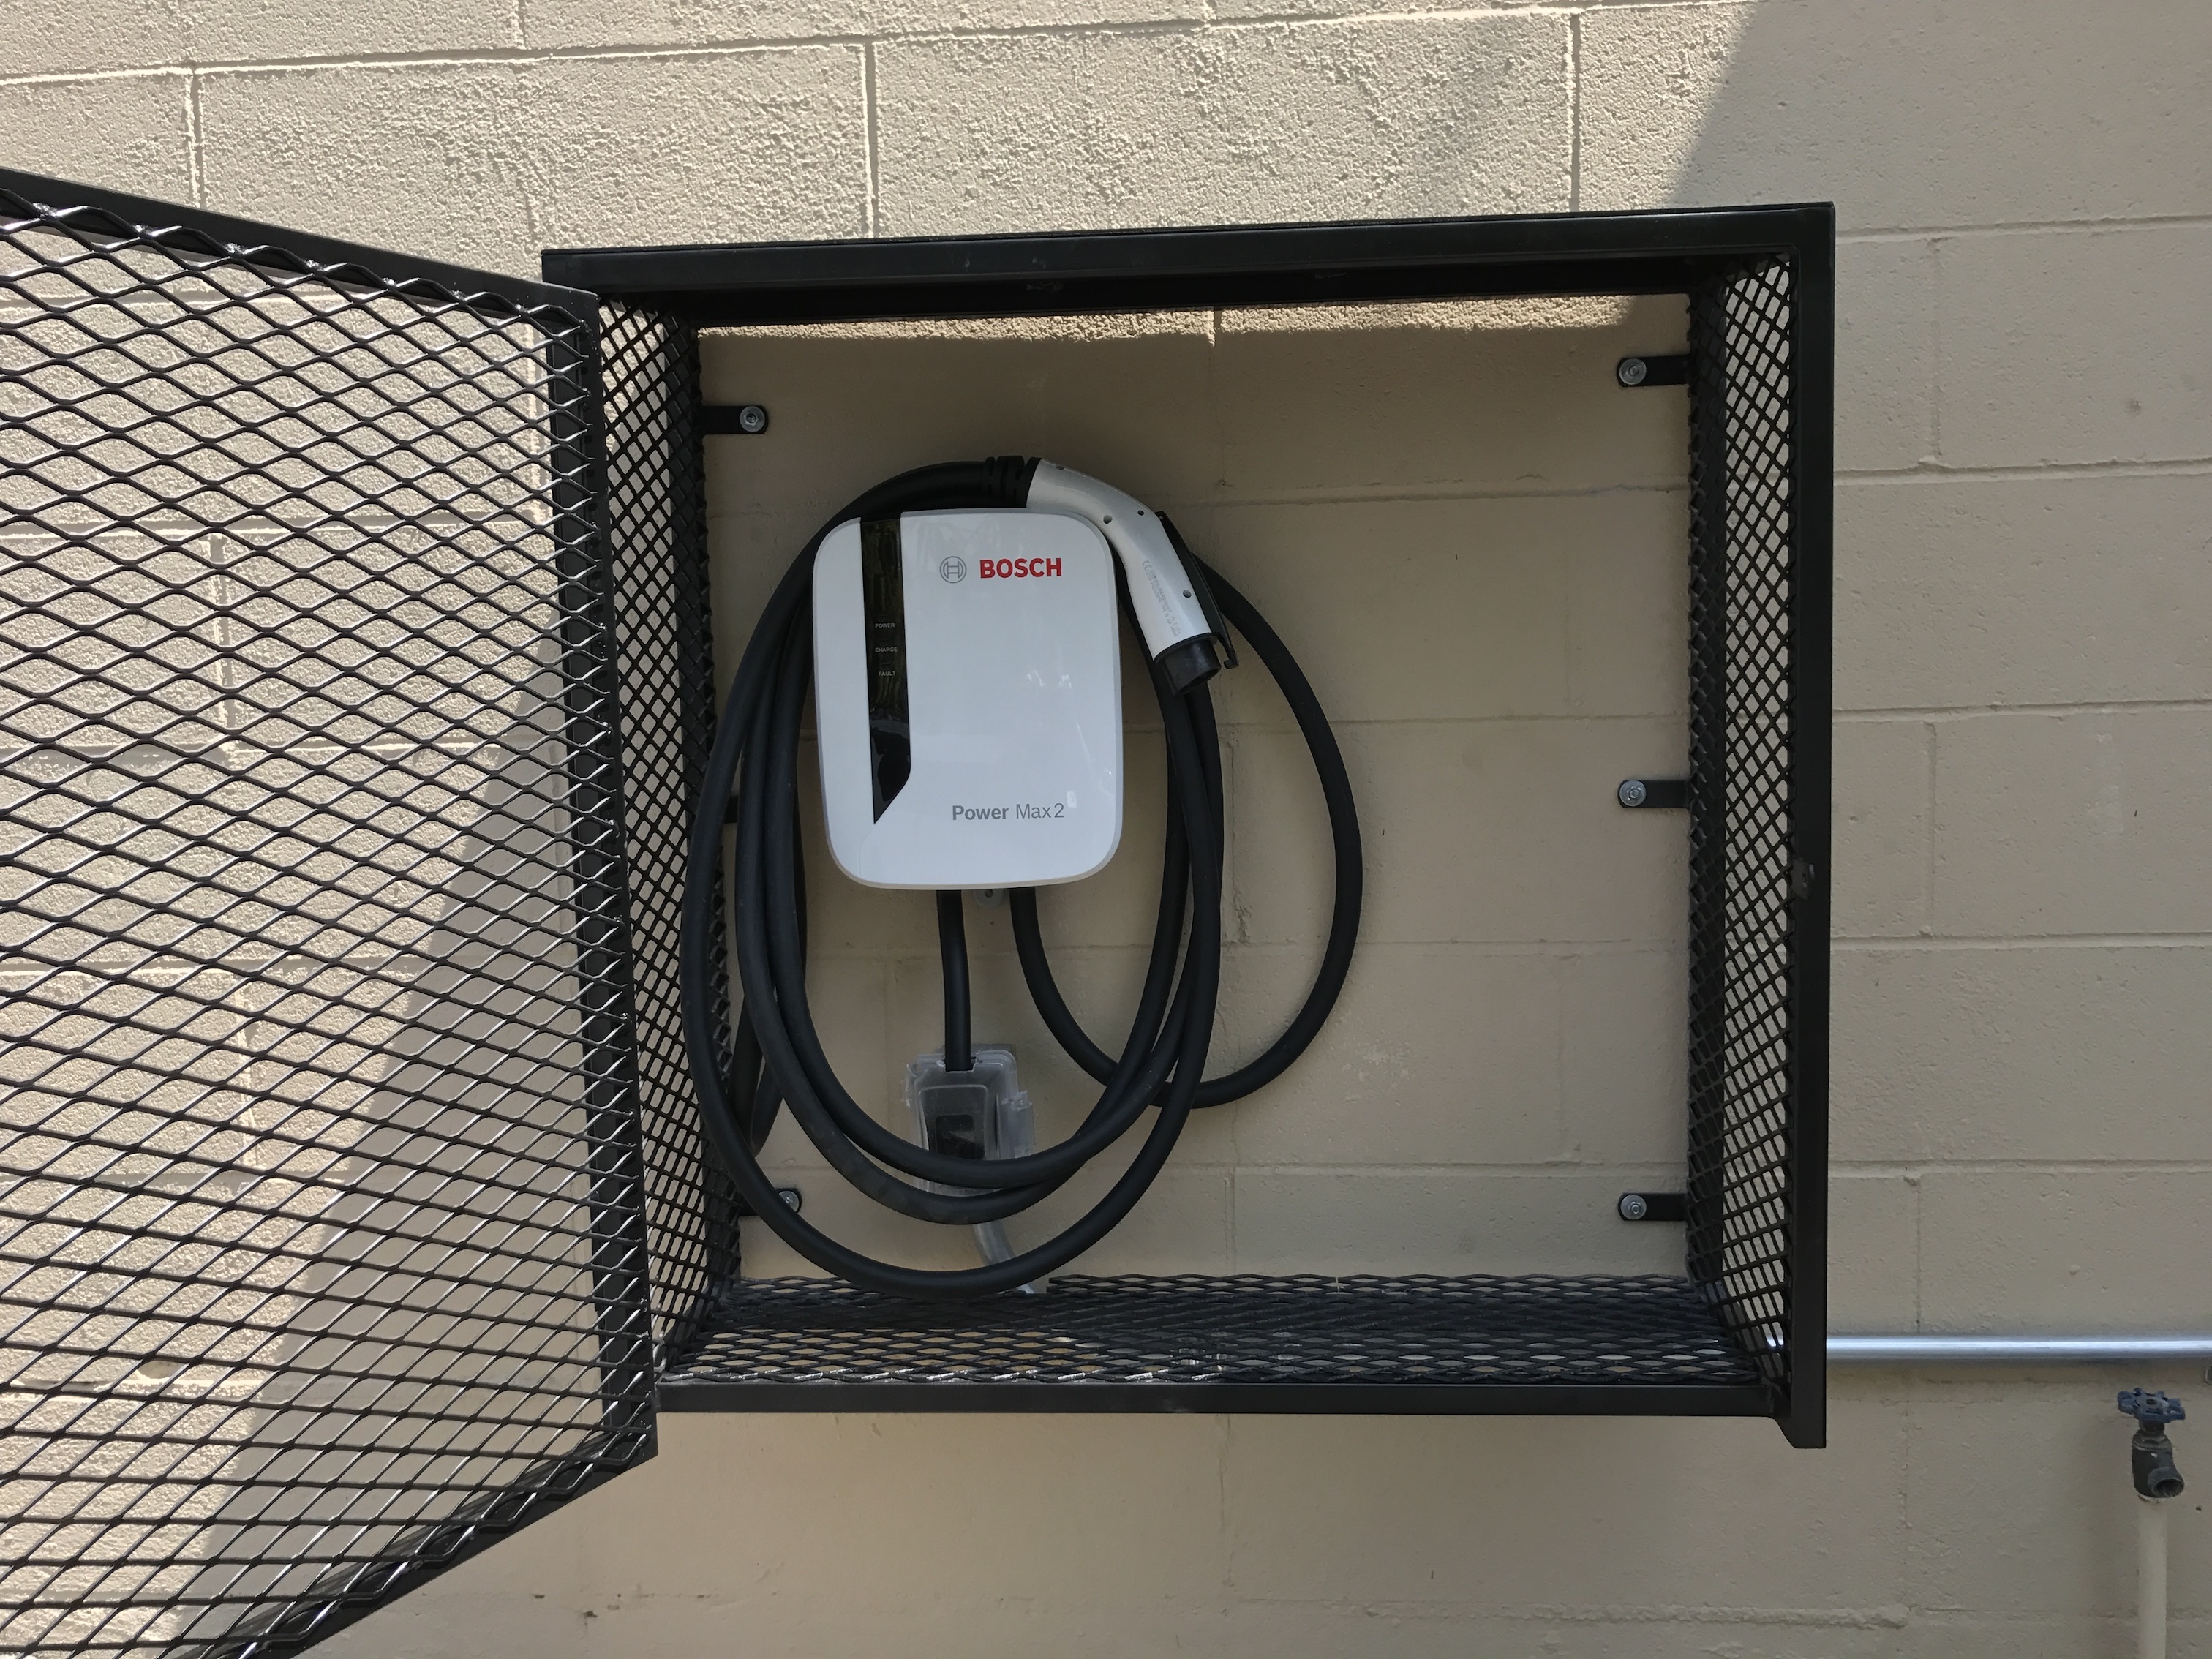 Bosch Level II 9.6kW Electric Vehicle Charger